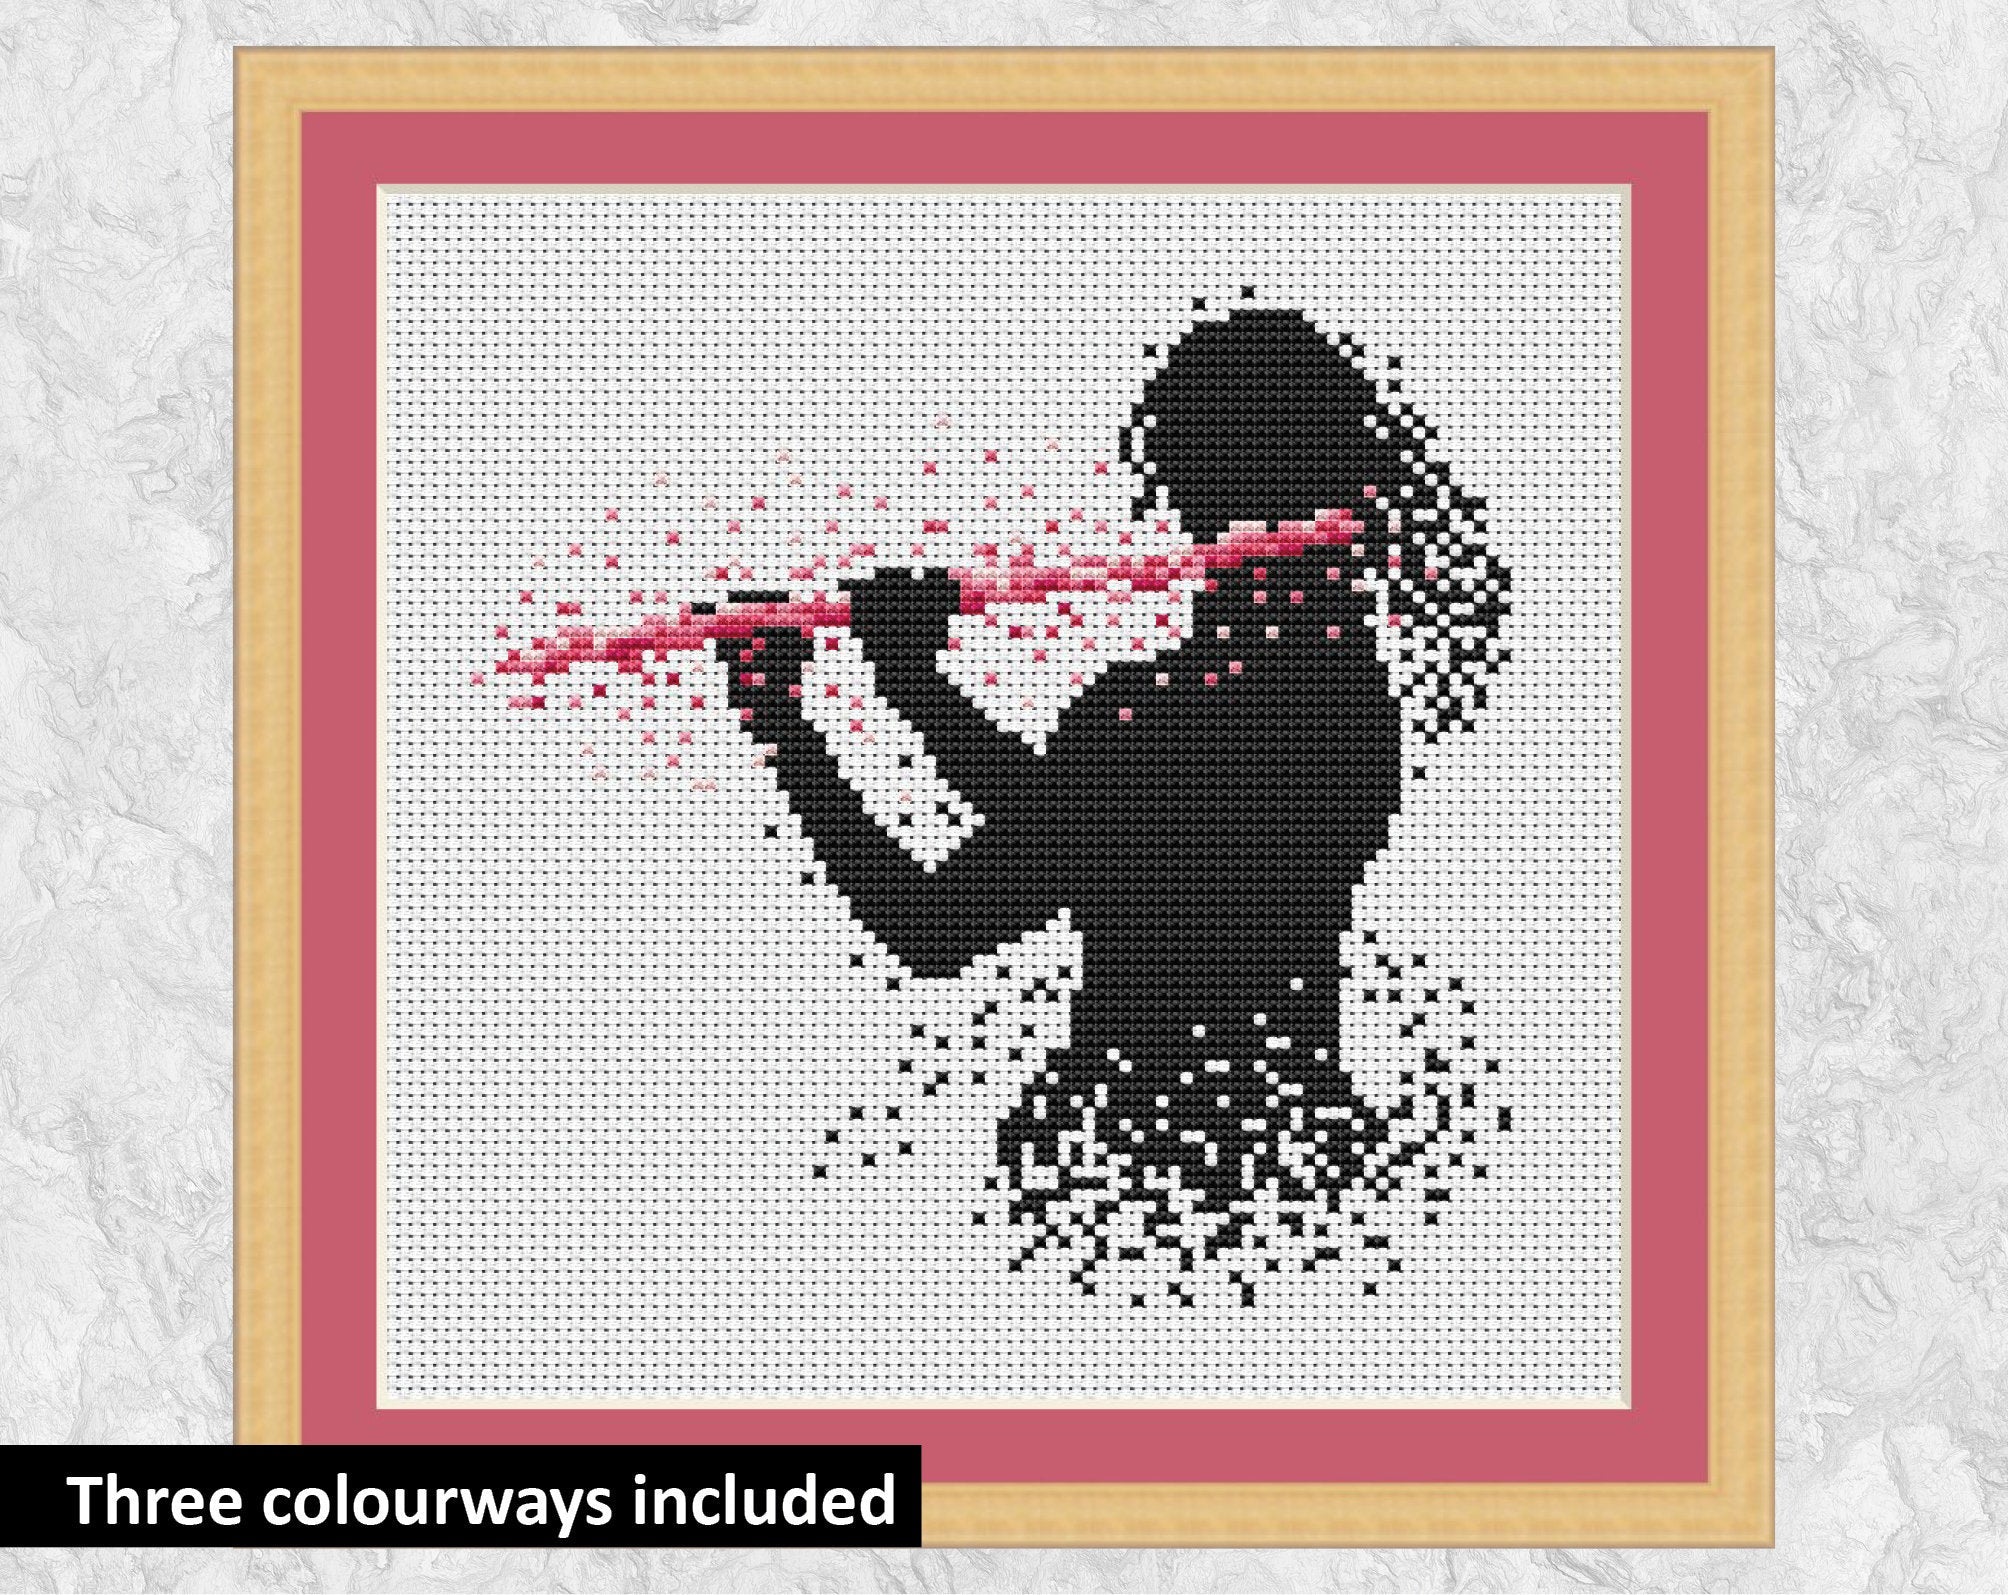 Female flutist or flute player music cross stitch pattern. Pink colourway shown with frame.